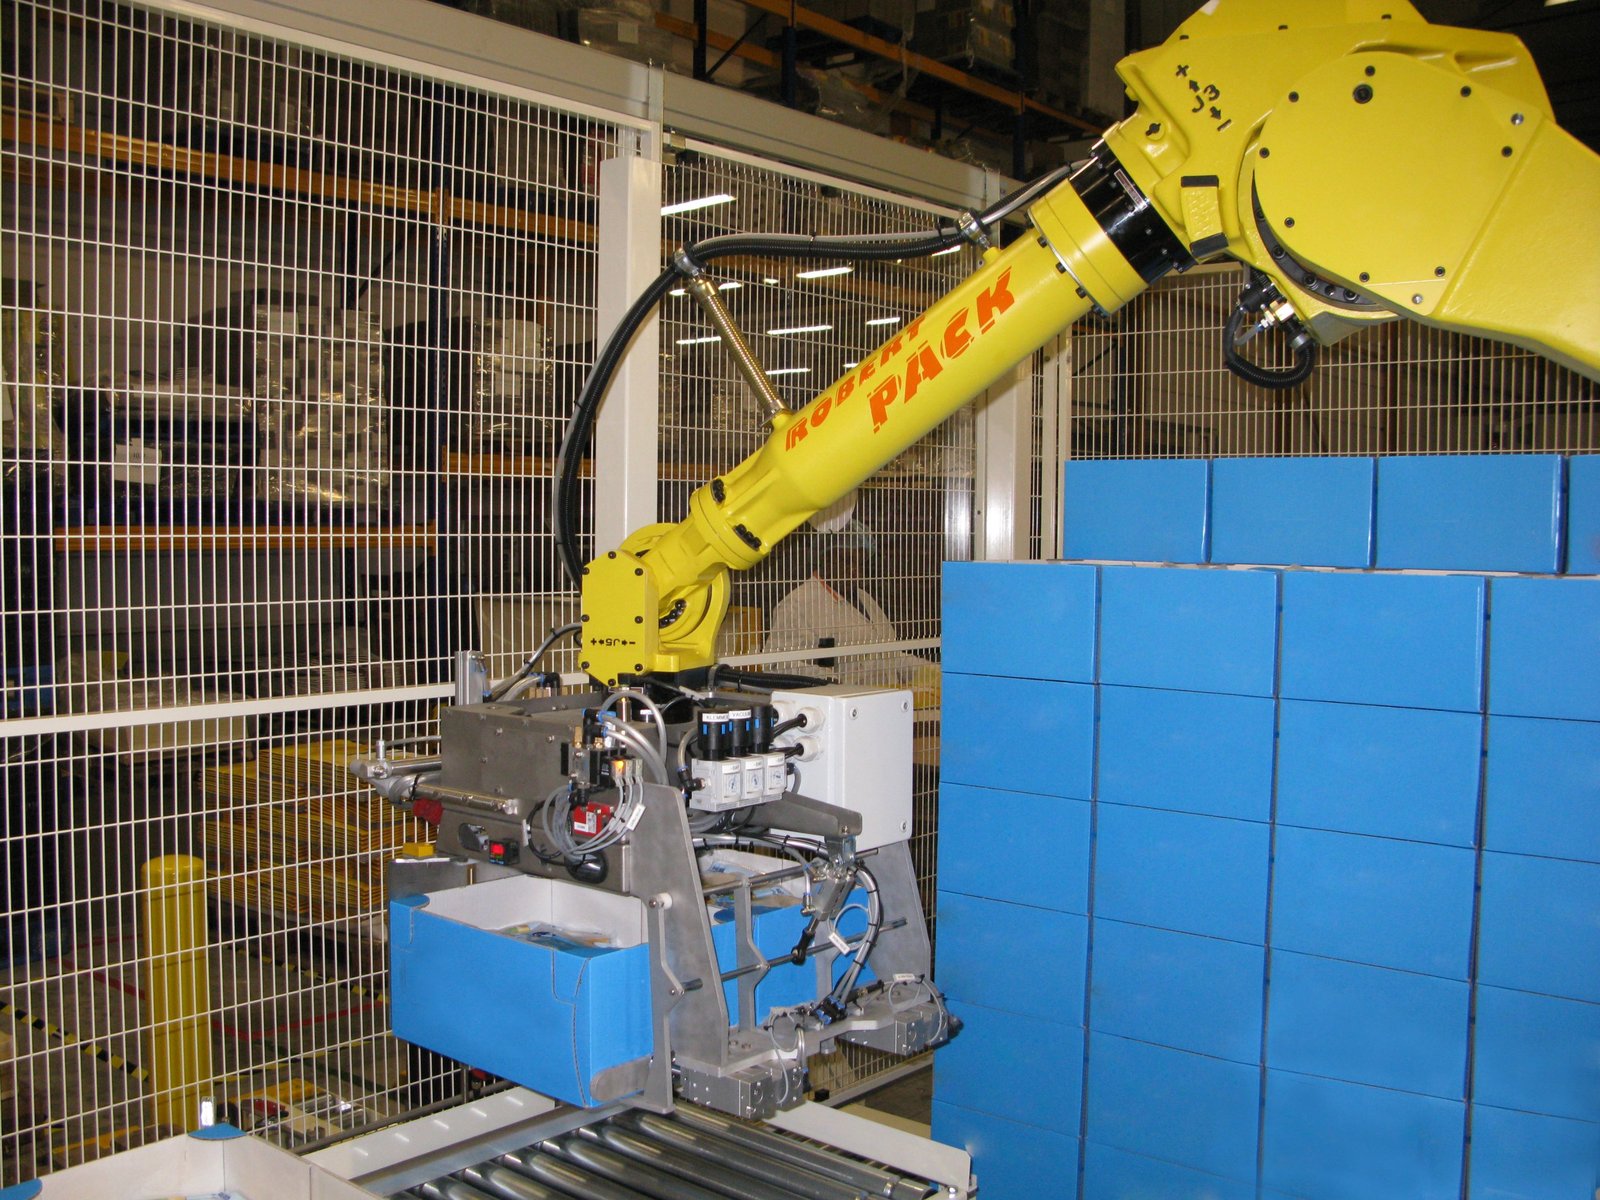 Fanuc-robot-for-palletising-cartons-with-cheese